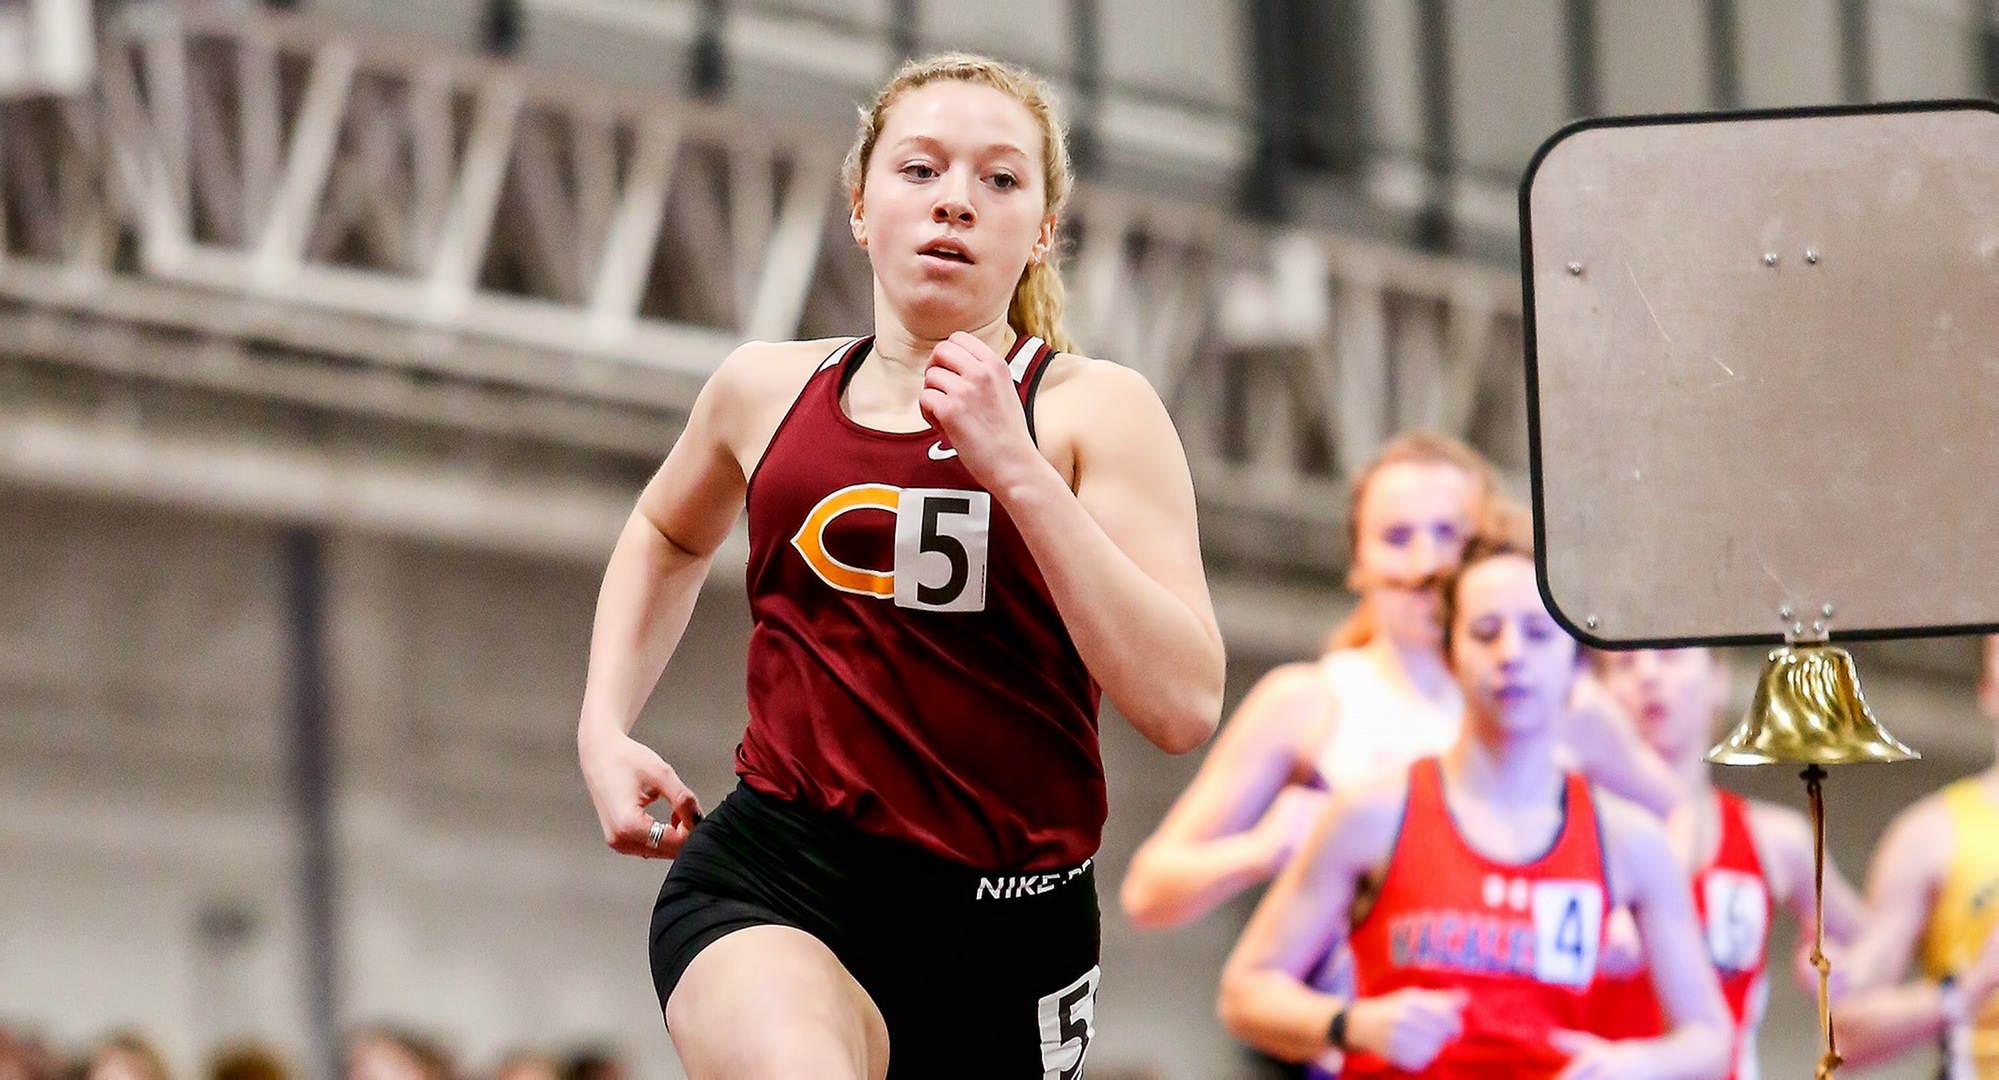 Junior Josie Herrmann had a pair of fourth-place finishes at the DI hosted NDSU Bison OPen meet. She now owns the fastest time in the MIAC in the 600 meters.